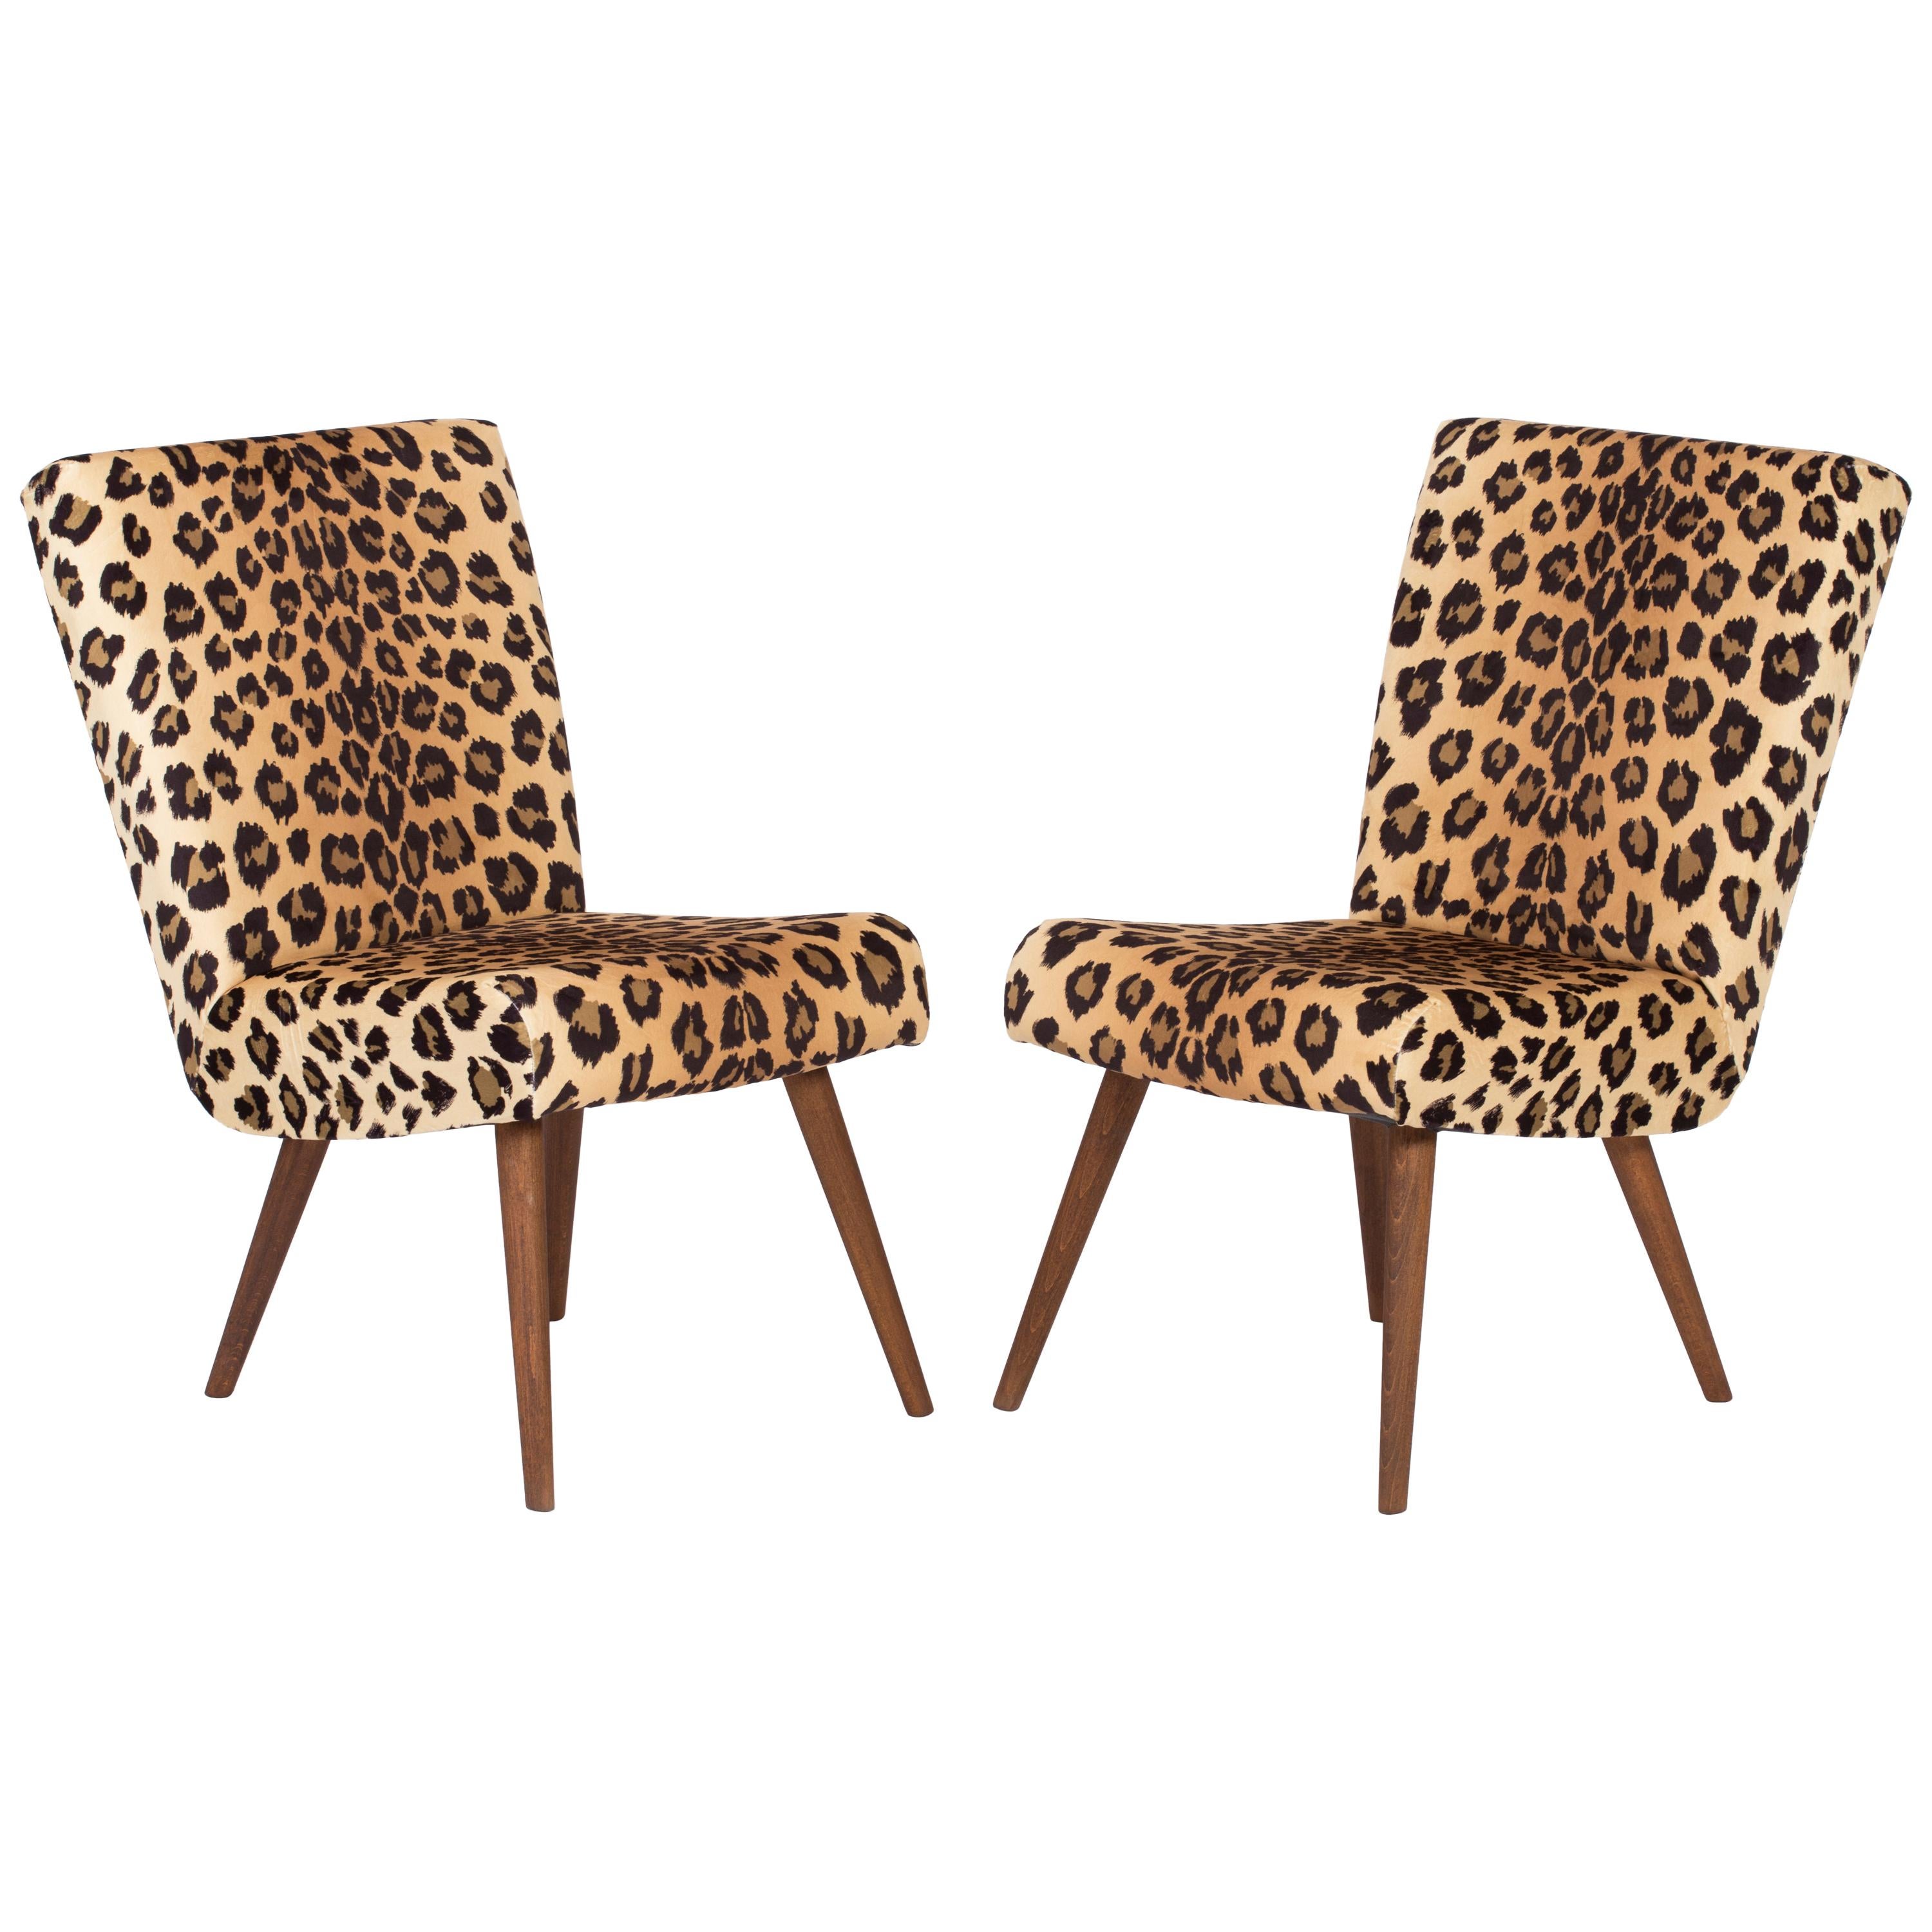 Set of Two Mid-Century Modern Leopard Print Chairs, 1960s, Germany